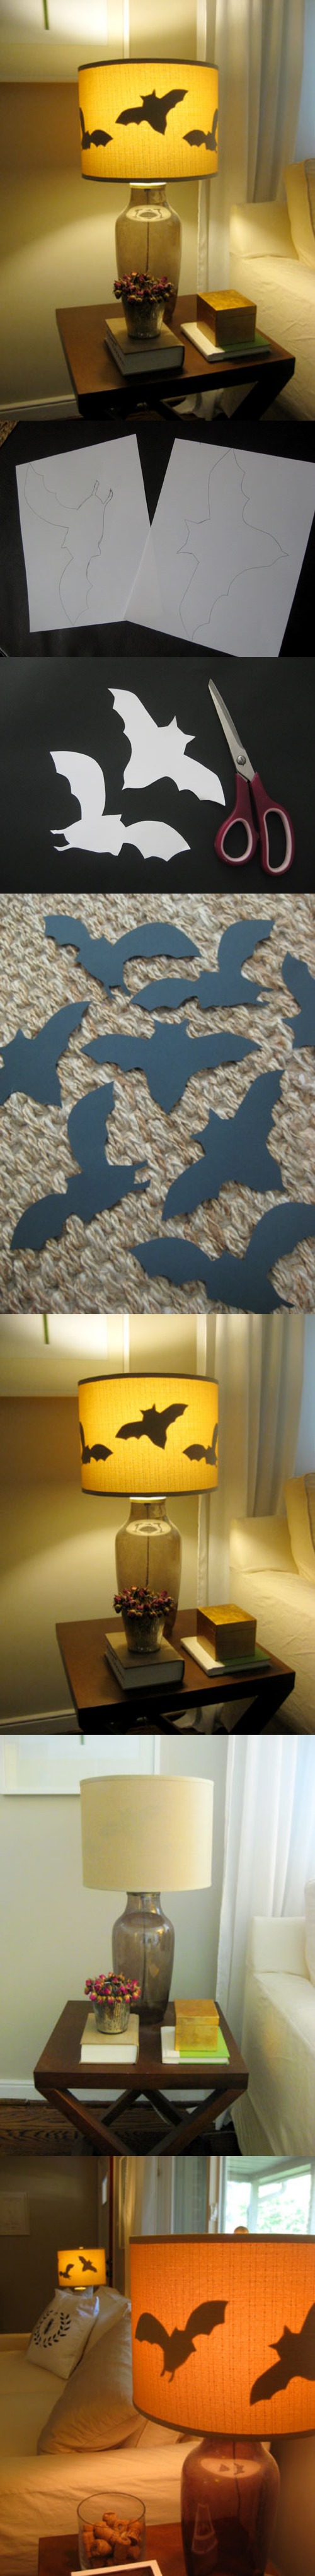 5. Paper Bats For Lamp Shades